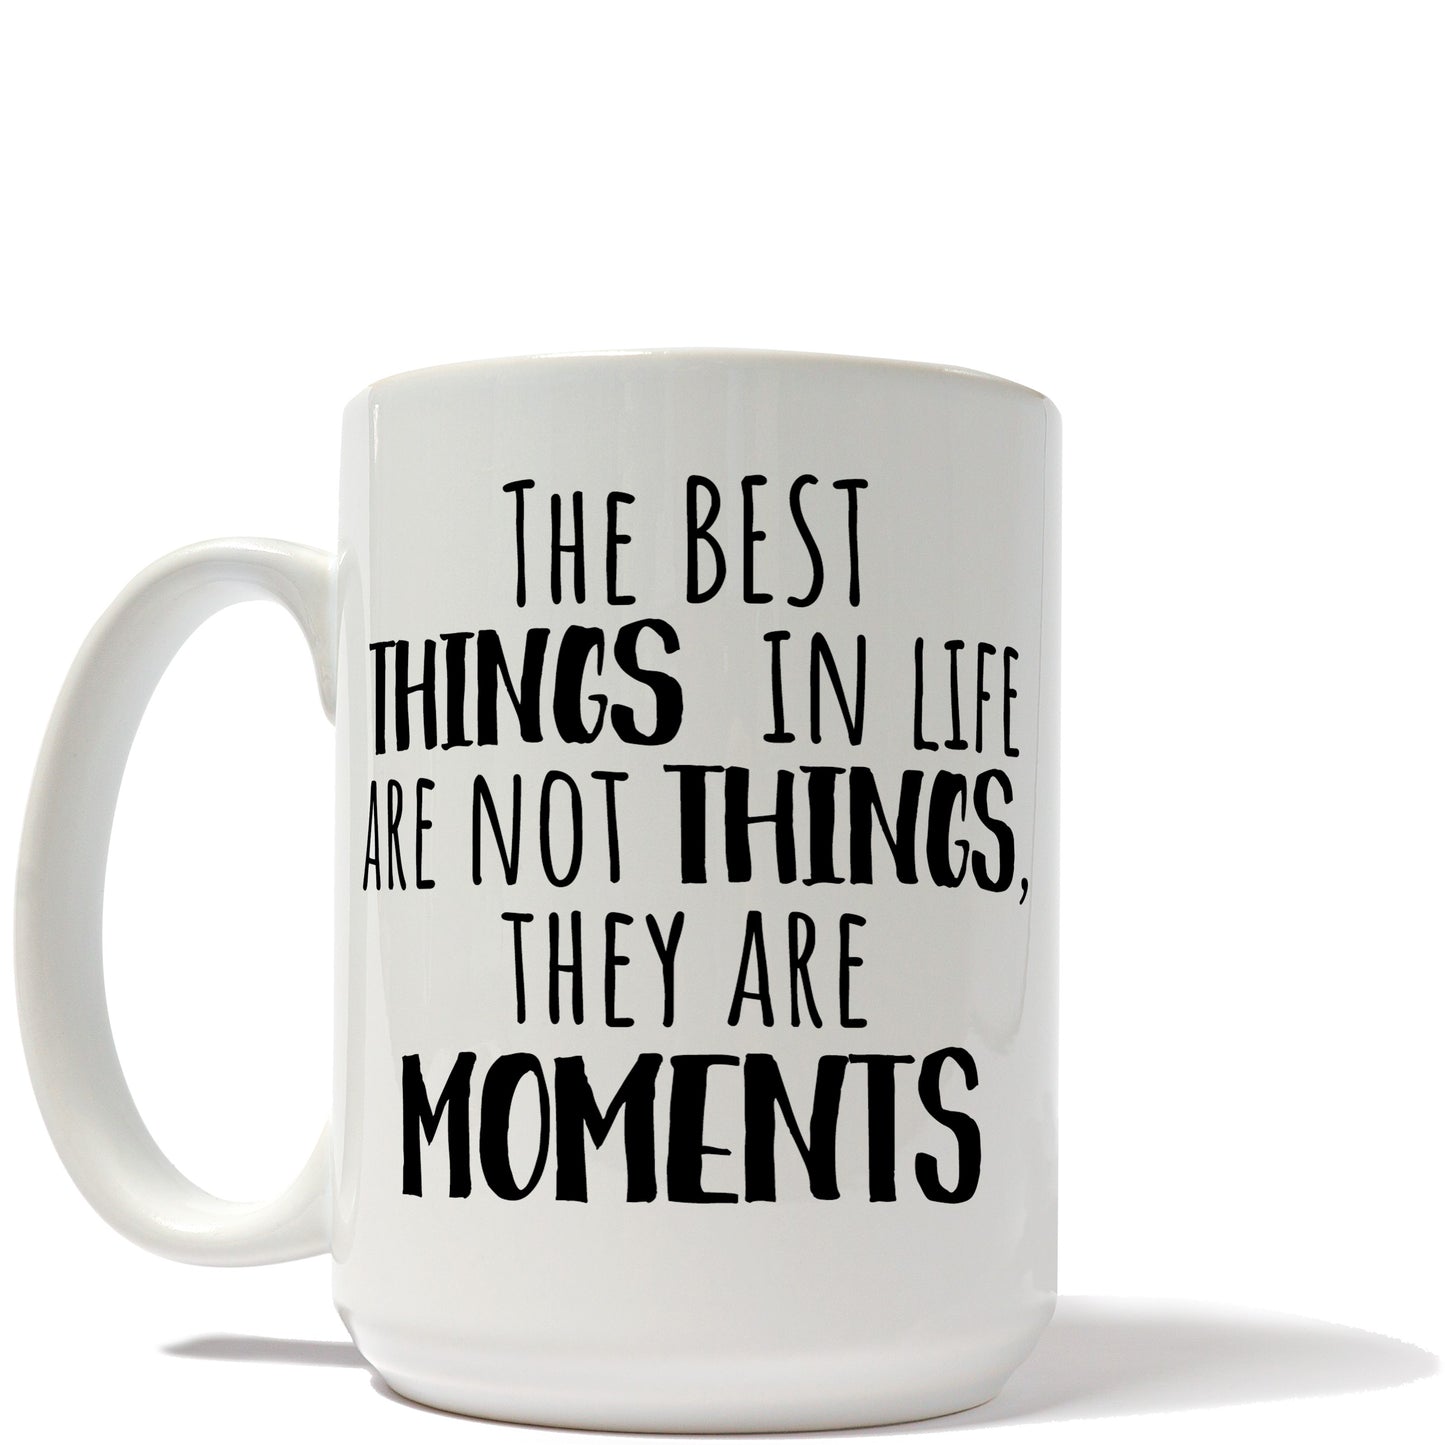 The Best Things In Life Are Not Things They Are Moments Mug